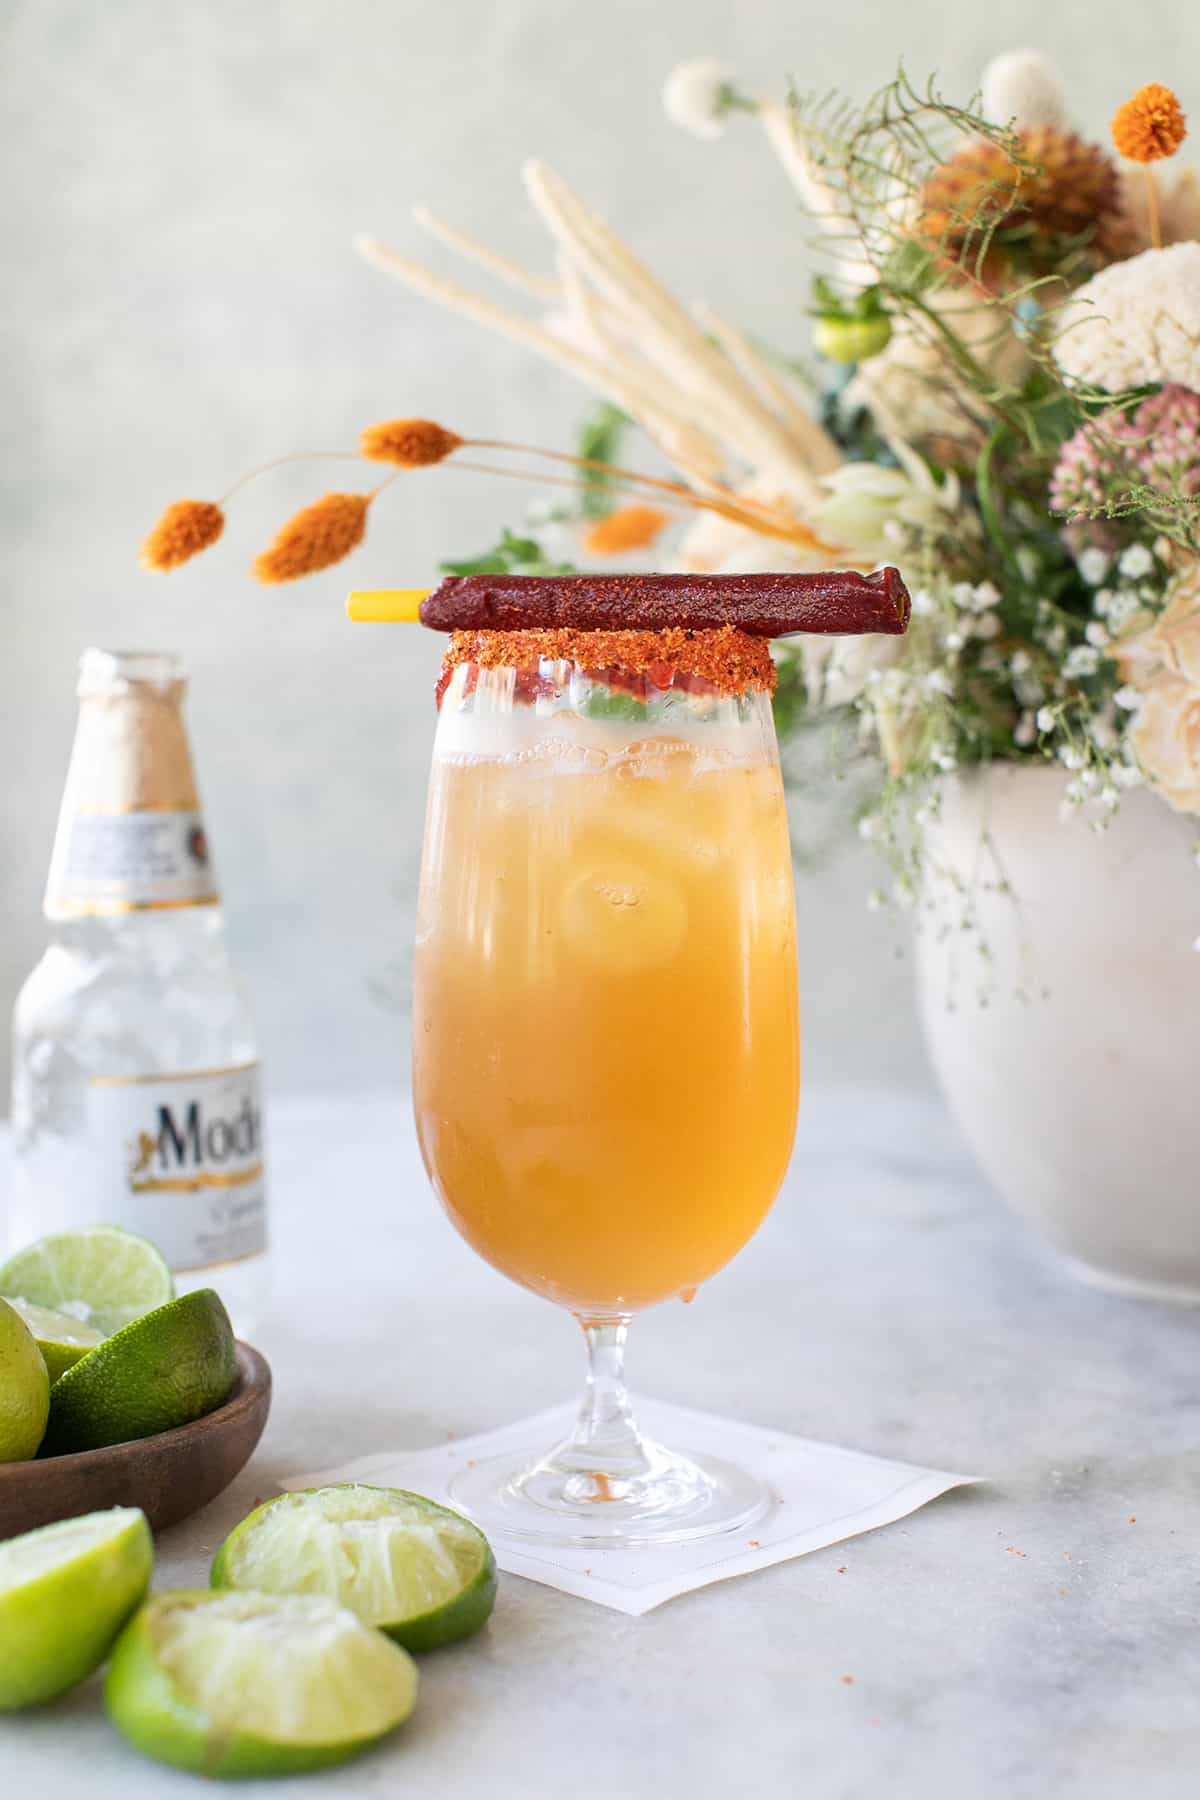 Michelada recipe in a glass with chammy stick and flowers.